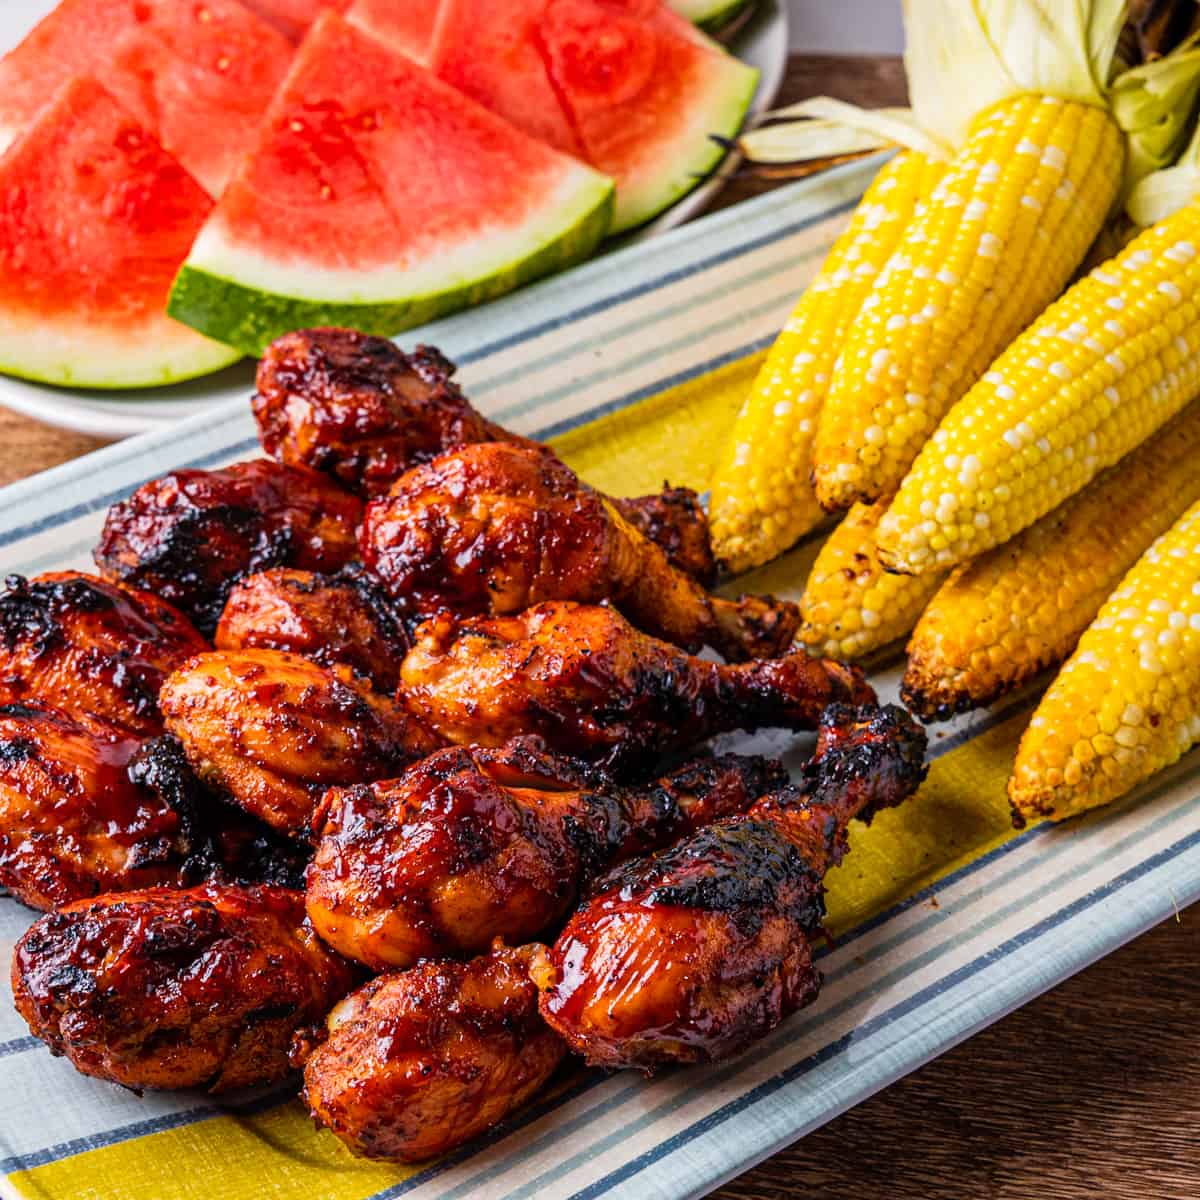 A platter of grilled chicken legs with corn and watermelon.